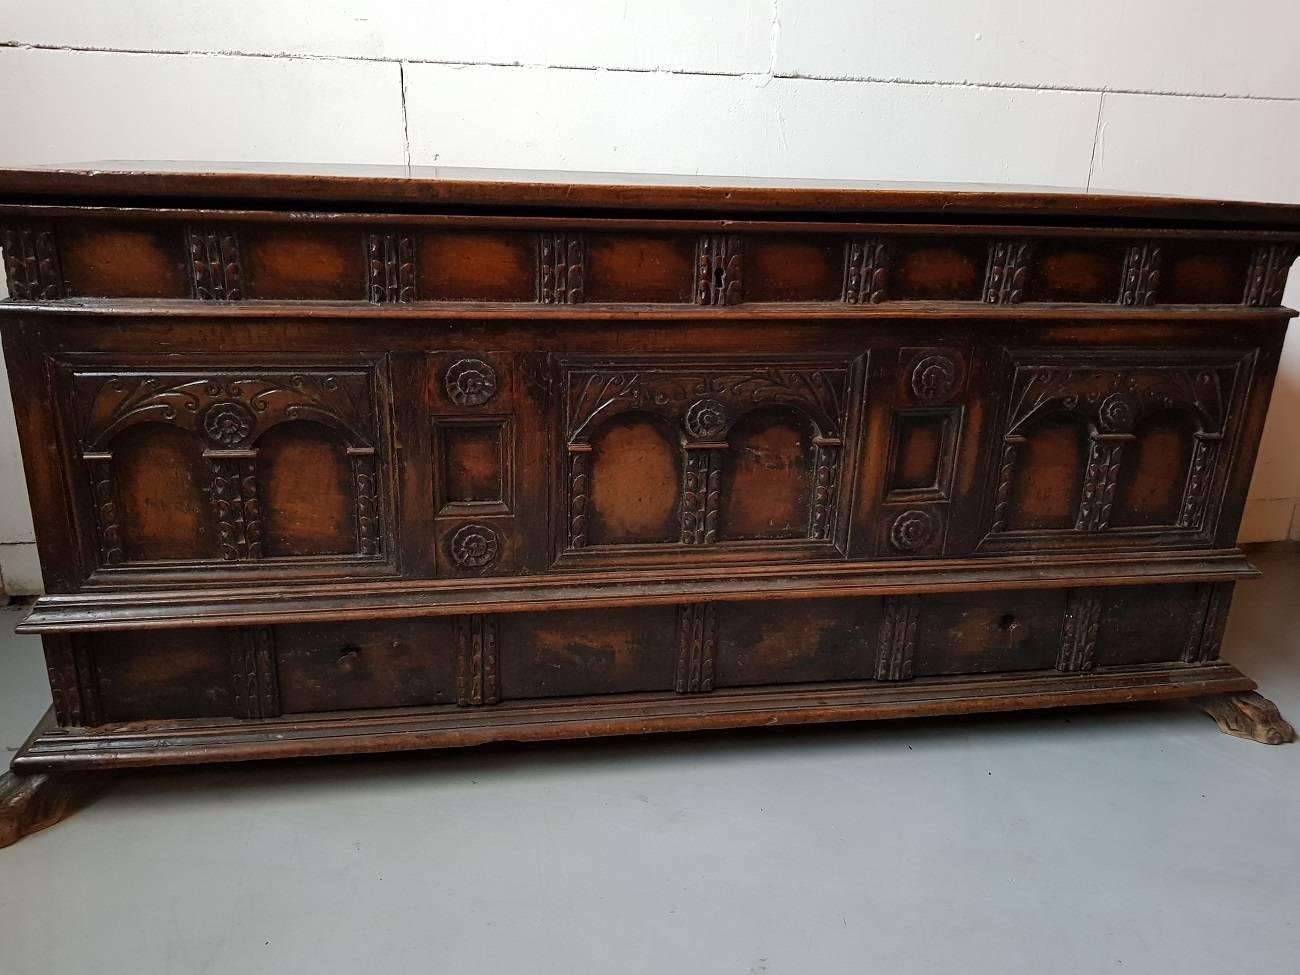 Antique carved walnut cassone coffer on paw feet from Italy, made in the 18th century, featuring beautiful carved panels on the front with paw feet at the base and a hidden drawer. This trunk can be used as a storage unit or as a bench. Excellent